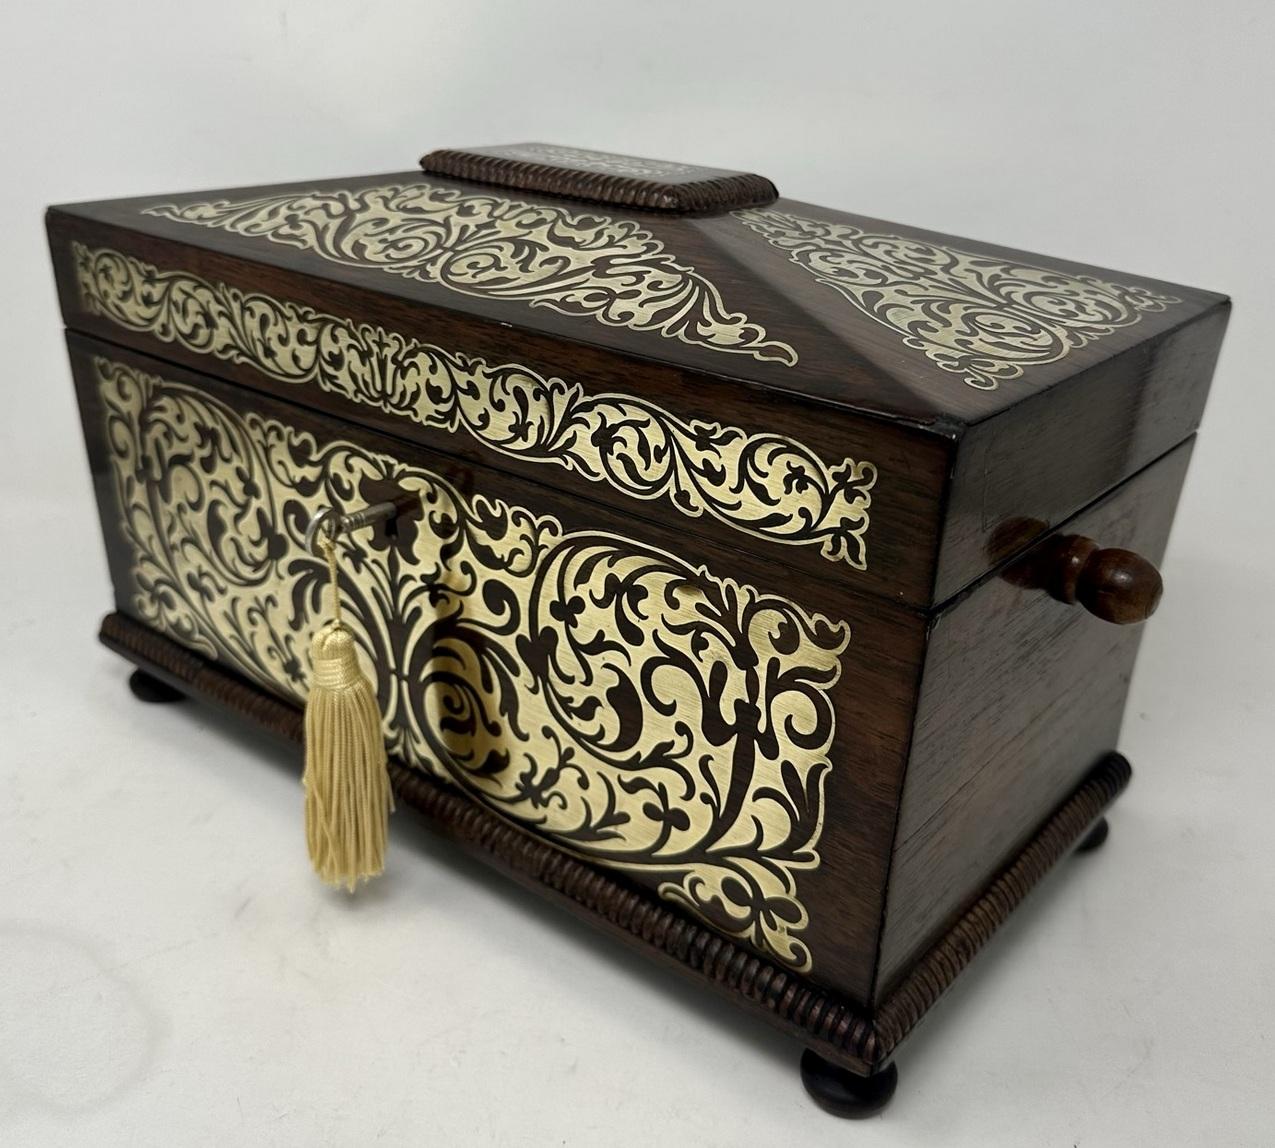 Polished Antique Brass Inlaid Mahogany English Tea Caddy Box Regency Gillows Lancaster For Sale